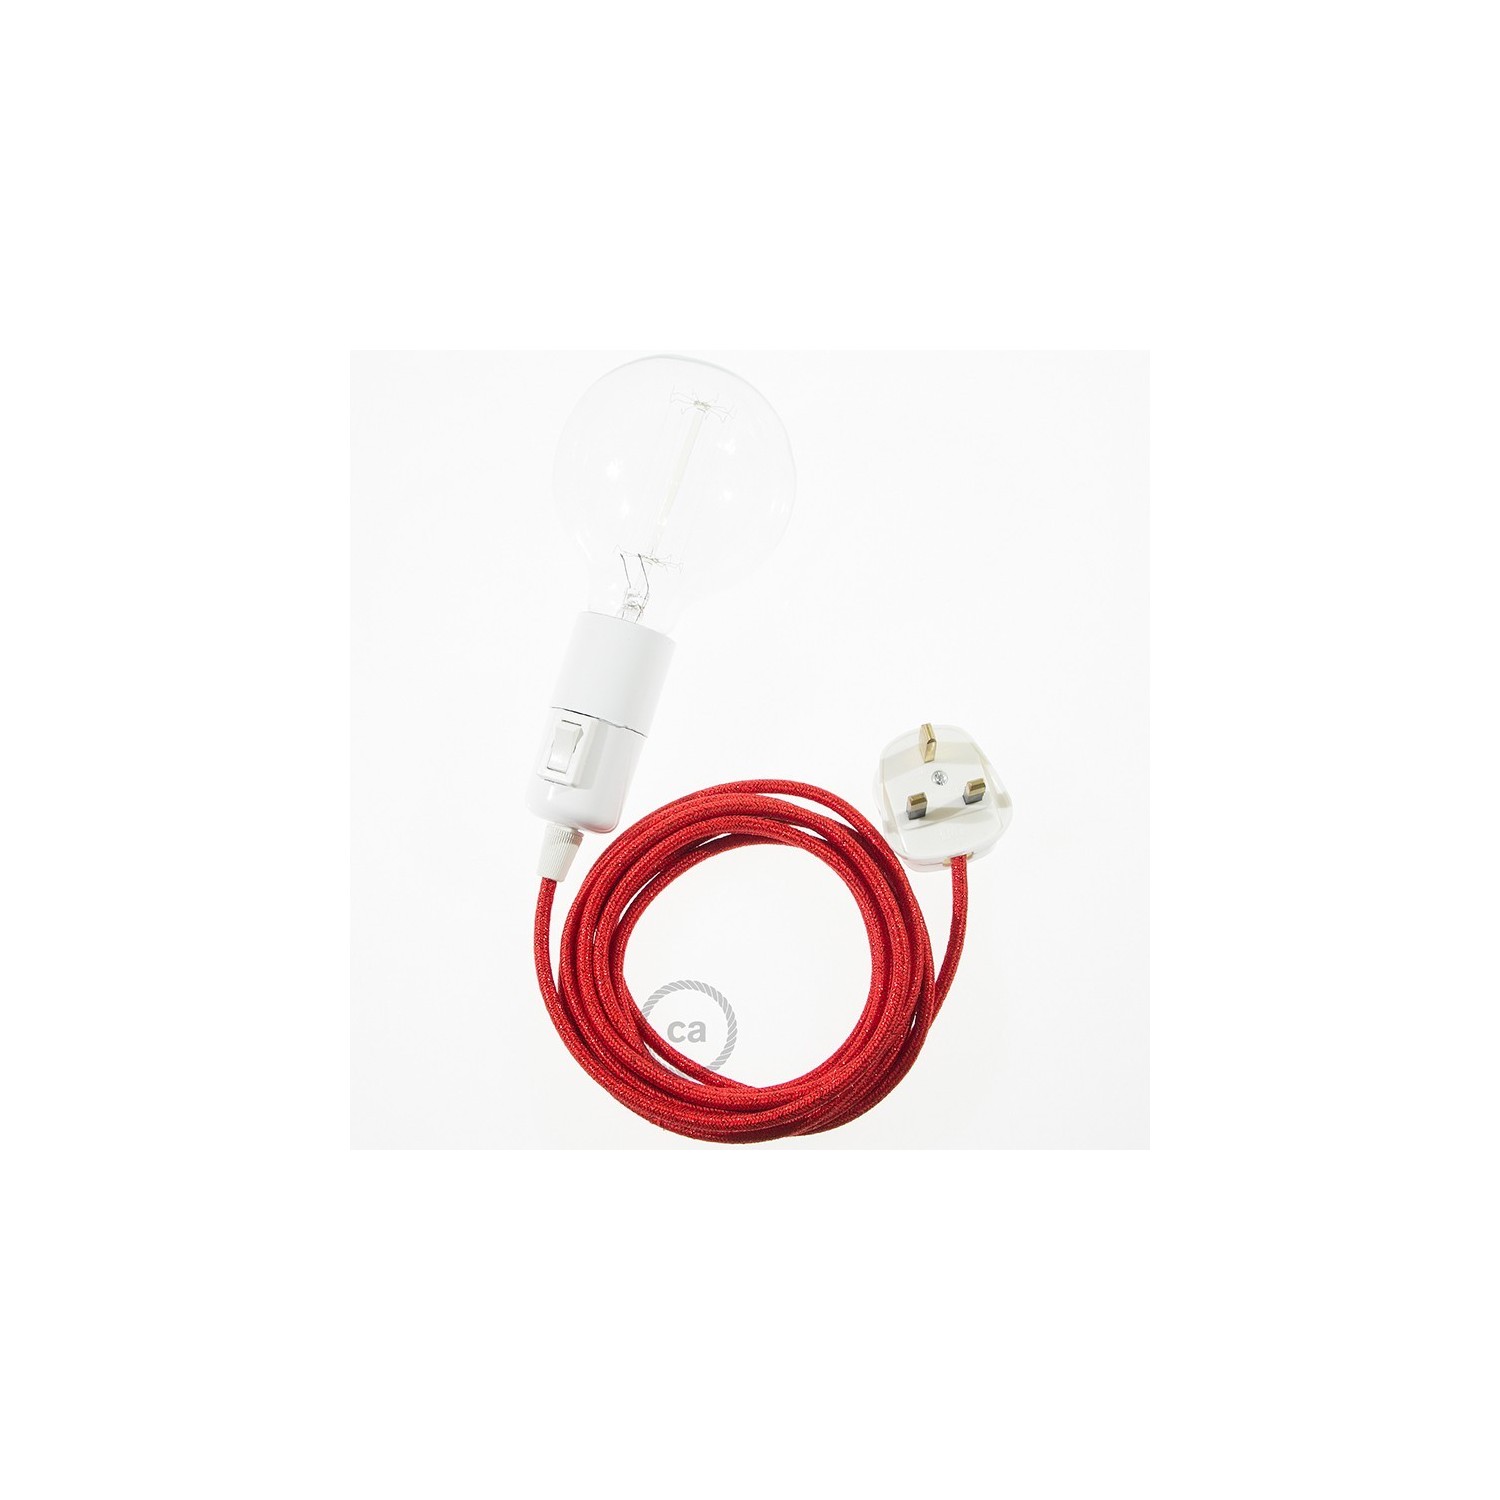 Create your RL09 Glittering Red Snake and bring the light wherever you want.